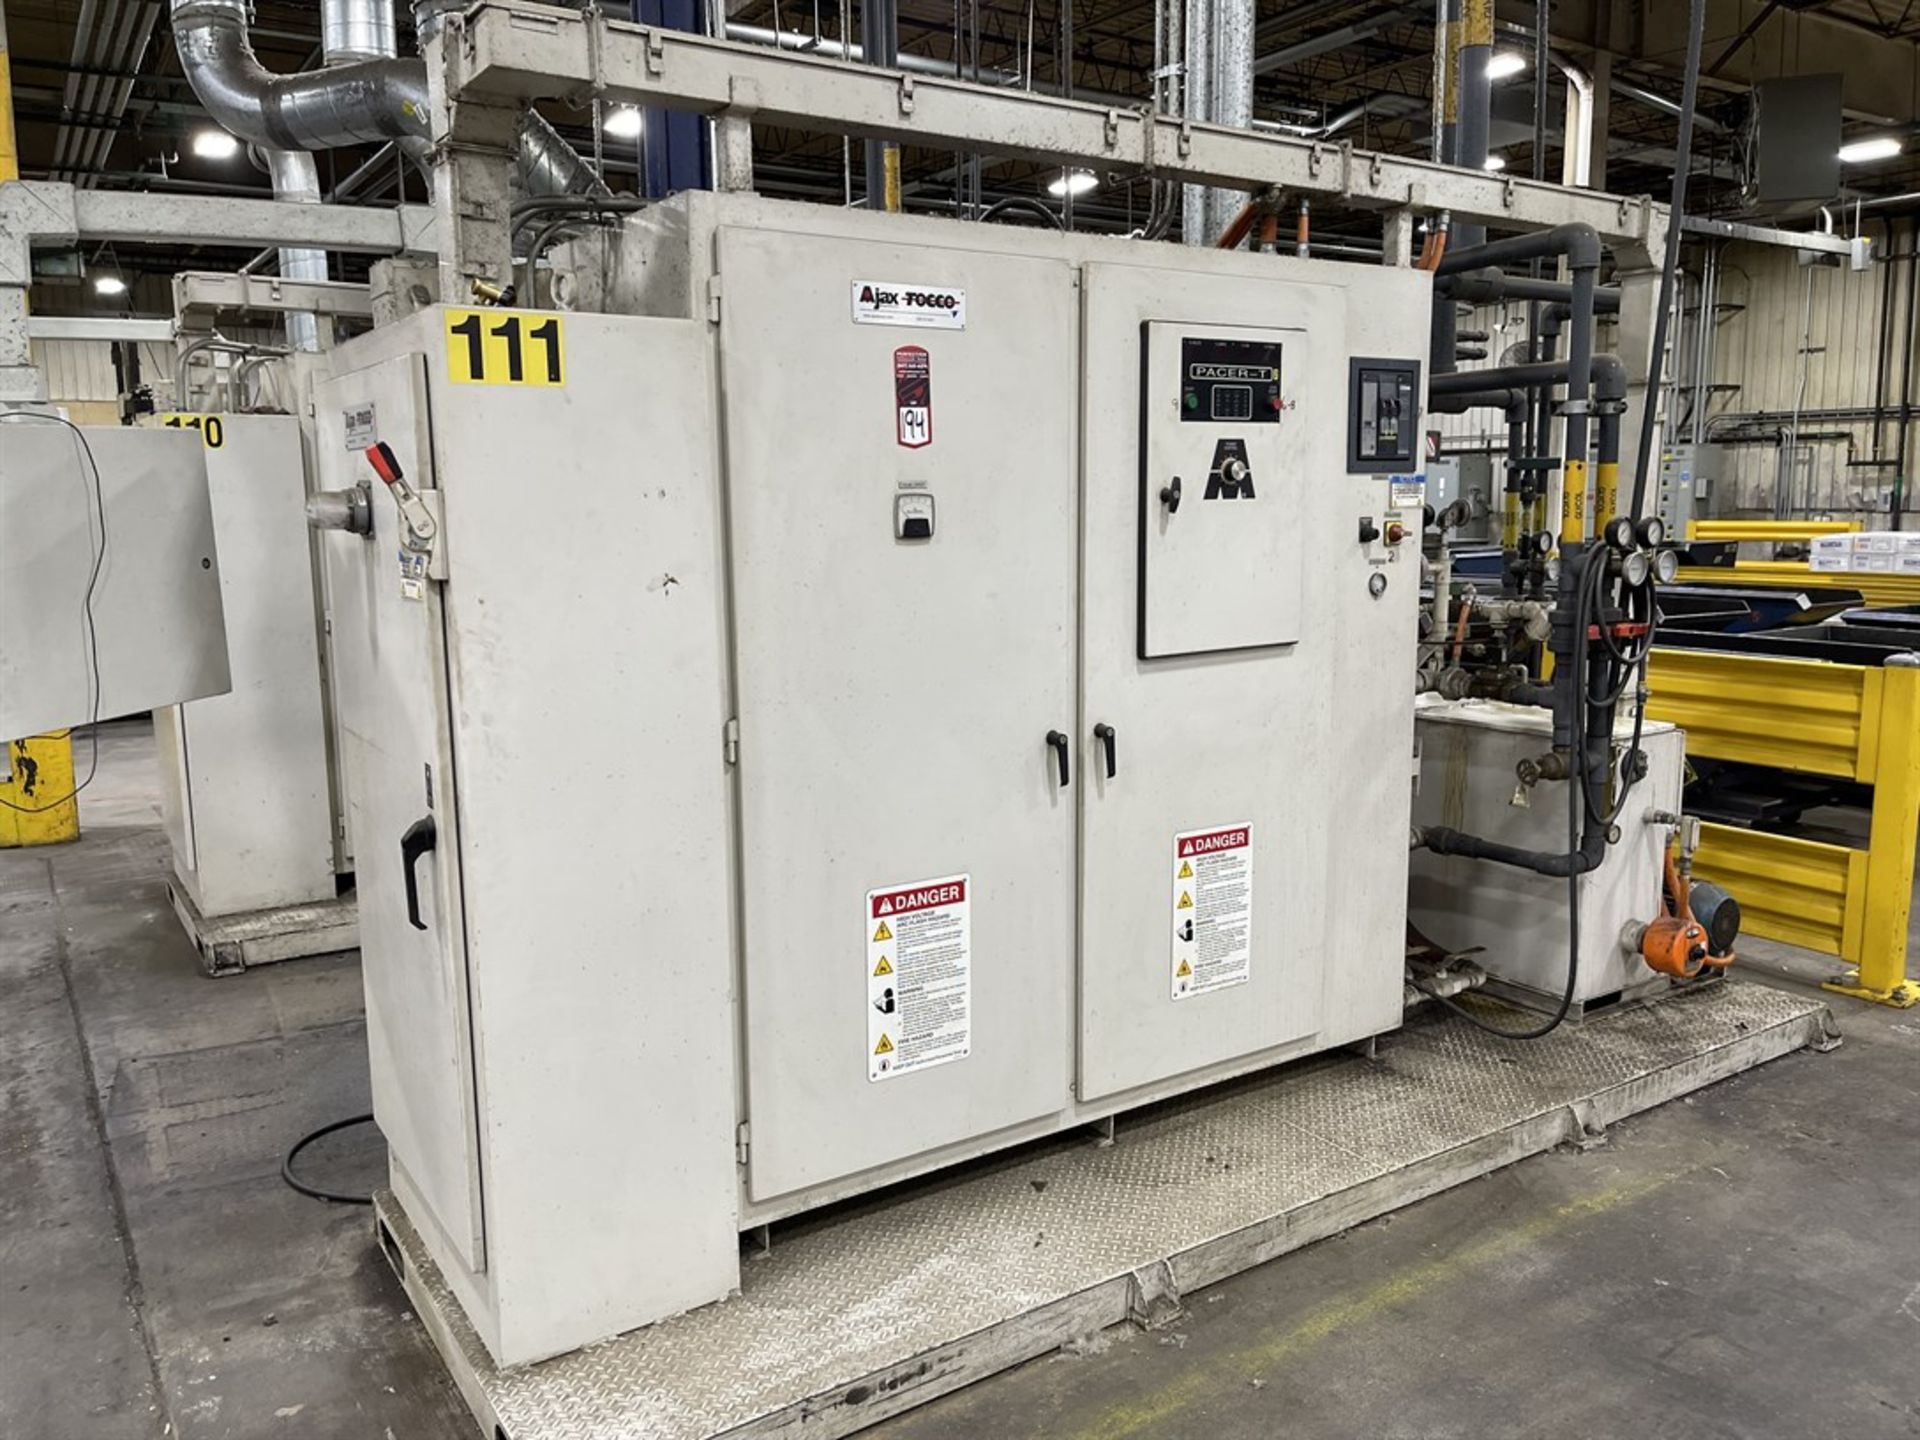 2012 AJAX TOCCO Pacer-T Induction Heater/Bending System, s/n 71-1163-11-A, Allen-Bradley 1500P - Image 5 of 7